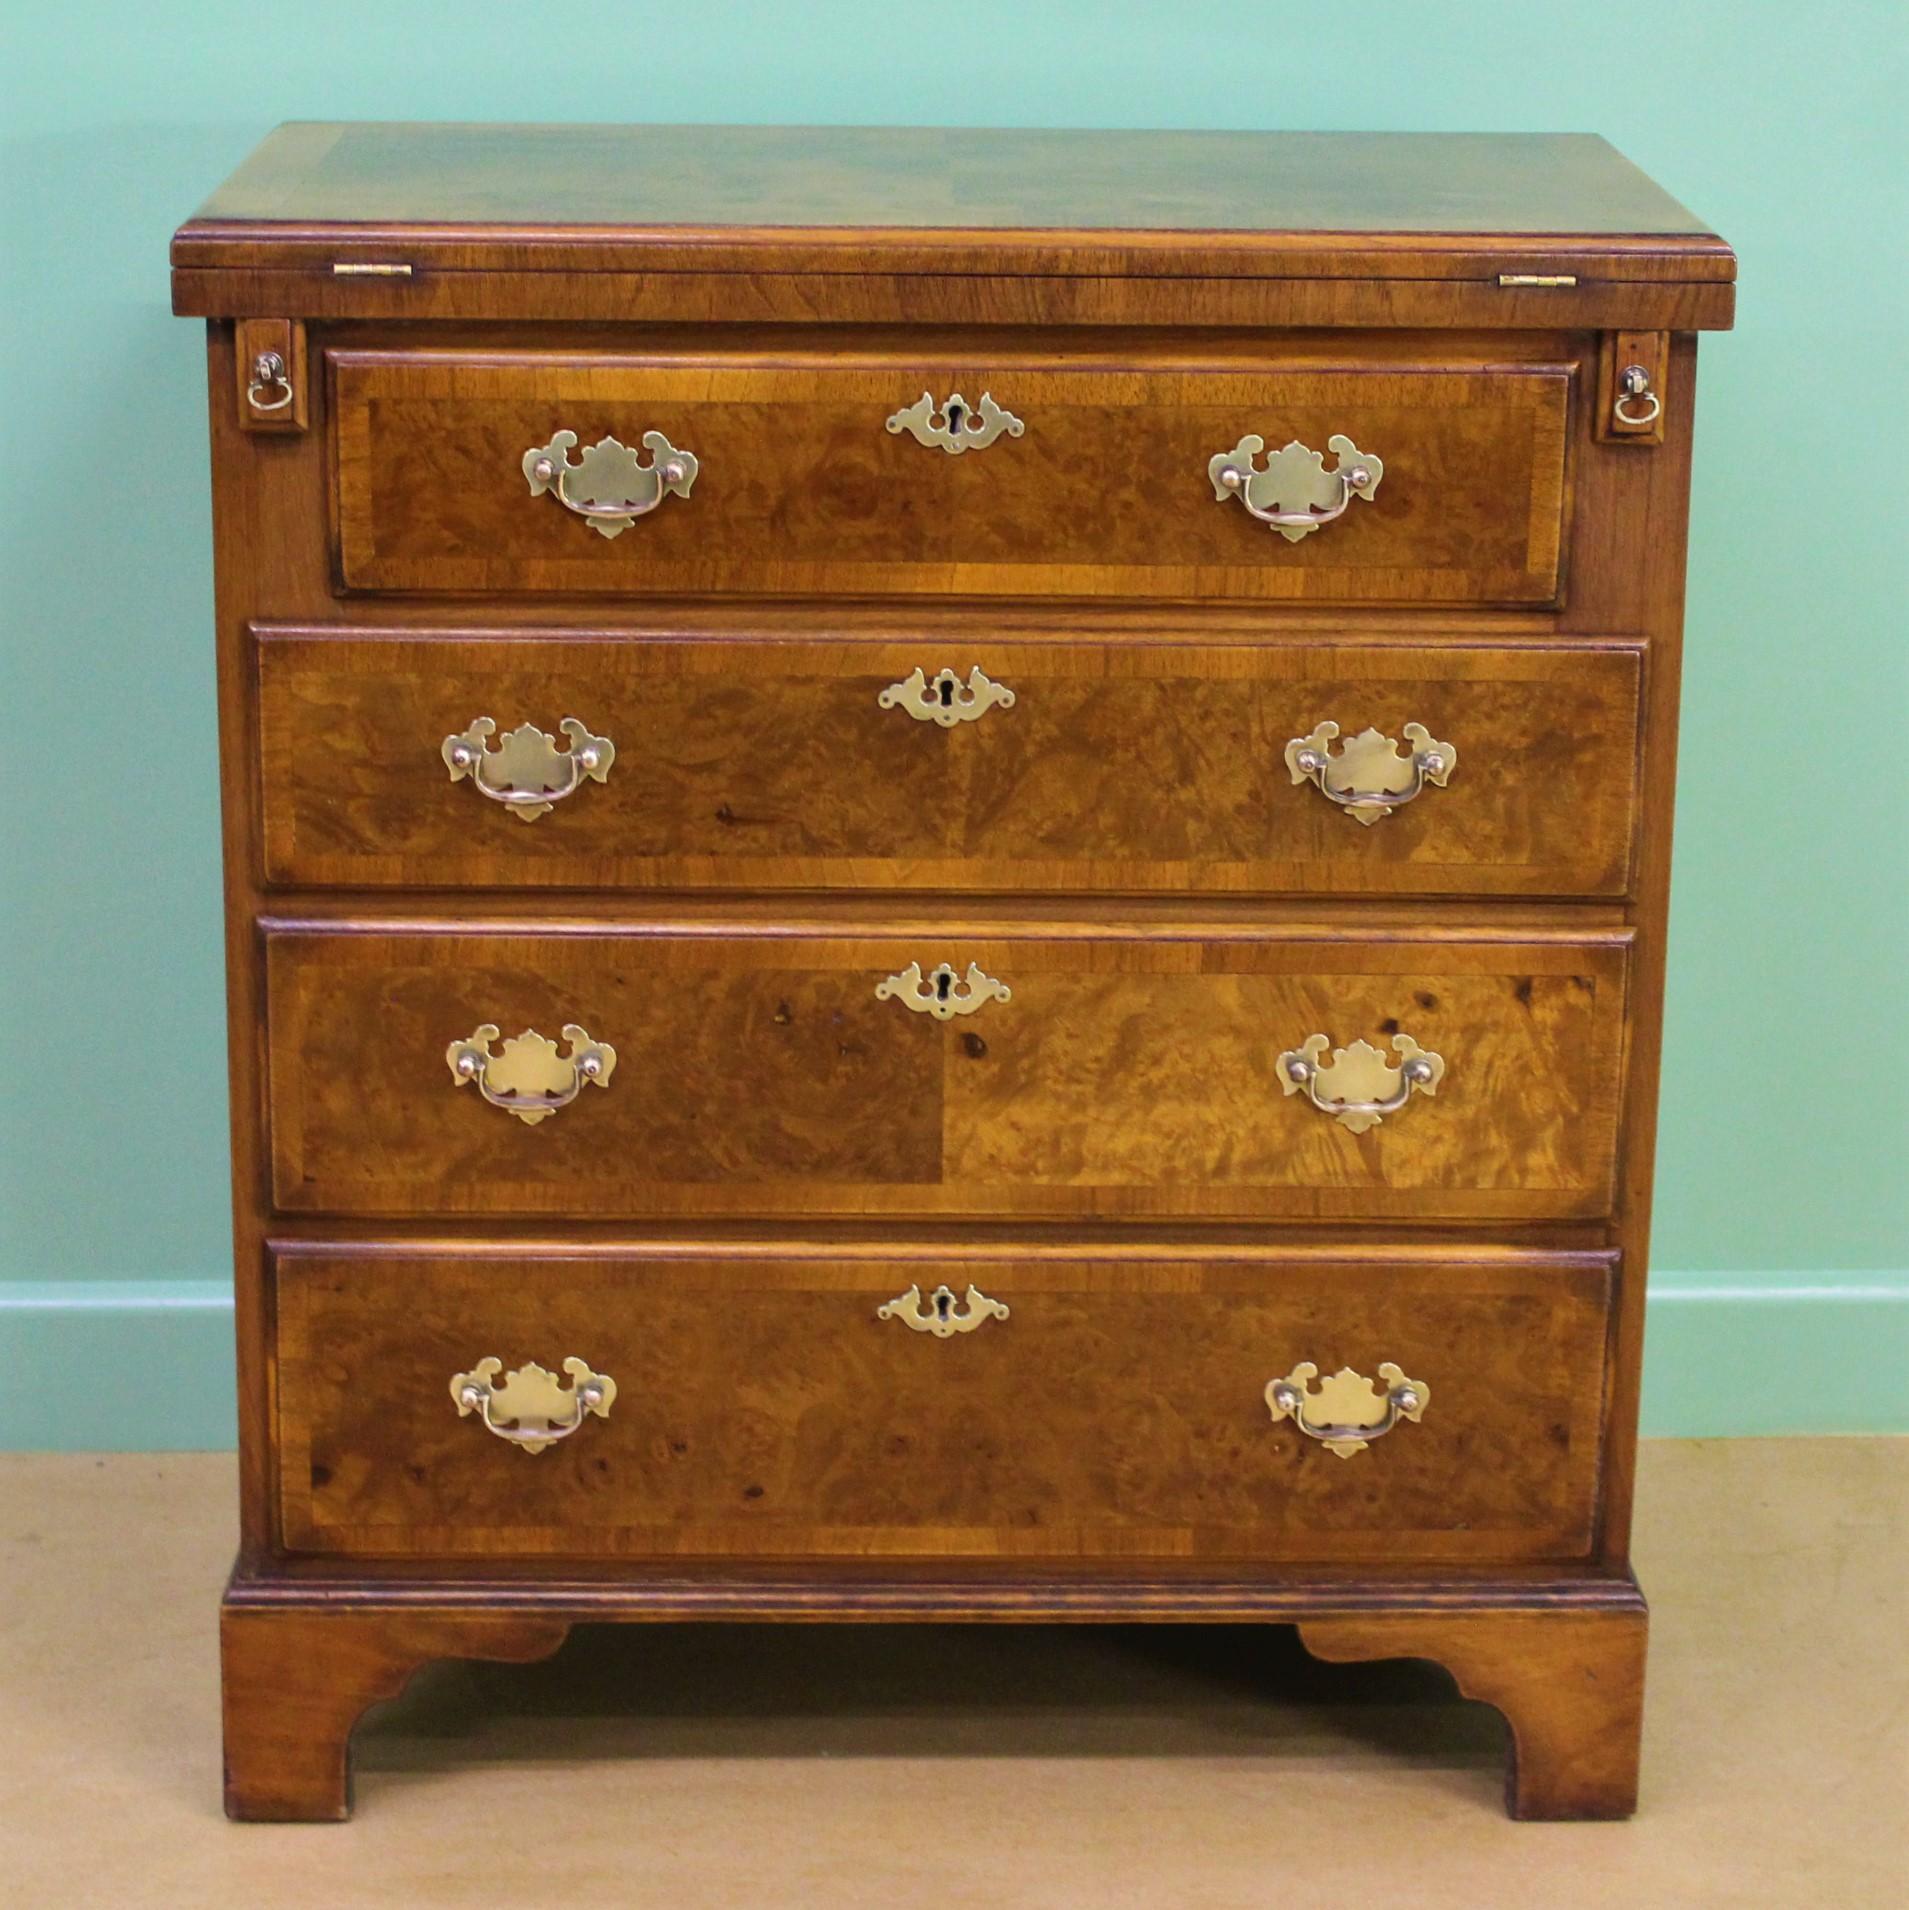 A charming George I style burr walnut bachelors chest of drawers. With a fold-over top (supported by pullout / pull-out loppers when open). With an arrangement of 4 graduated drawers, all fitted with their original solid brass swan-neck handles. The